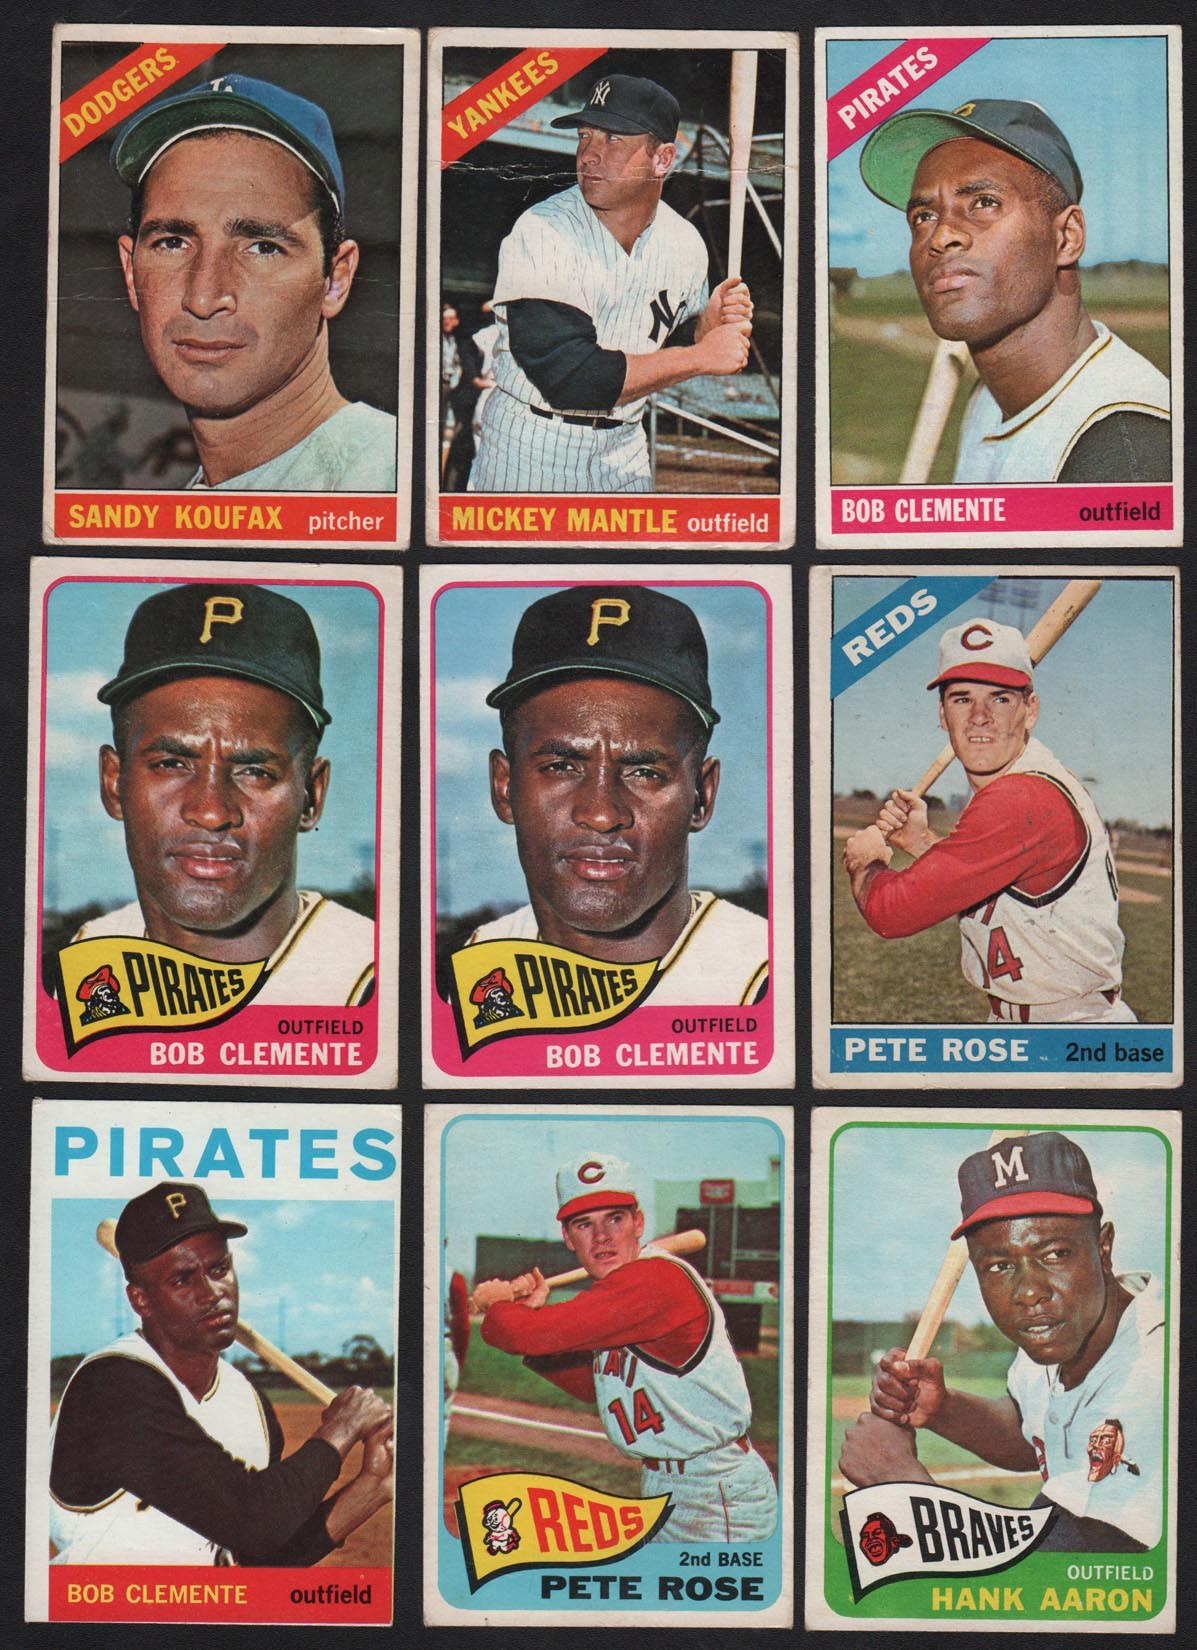 Baseball and Trading Cards - 1950s-60s Topps Hall of Fame & Superstar Collection - Mantle, Mays, Clemente, Aaron, Koufax (130+)